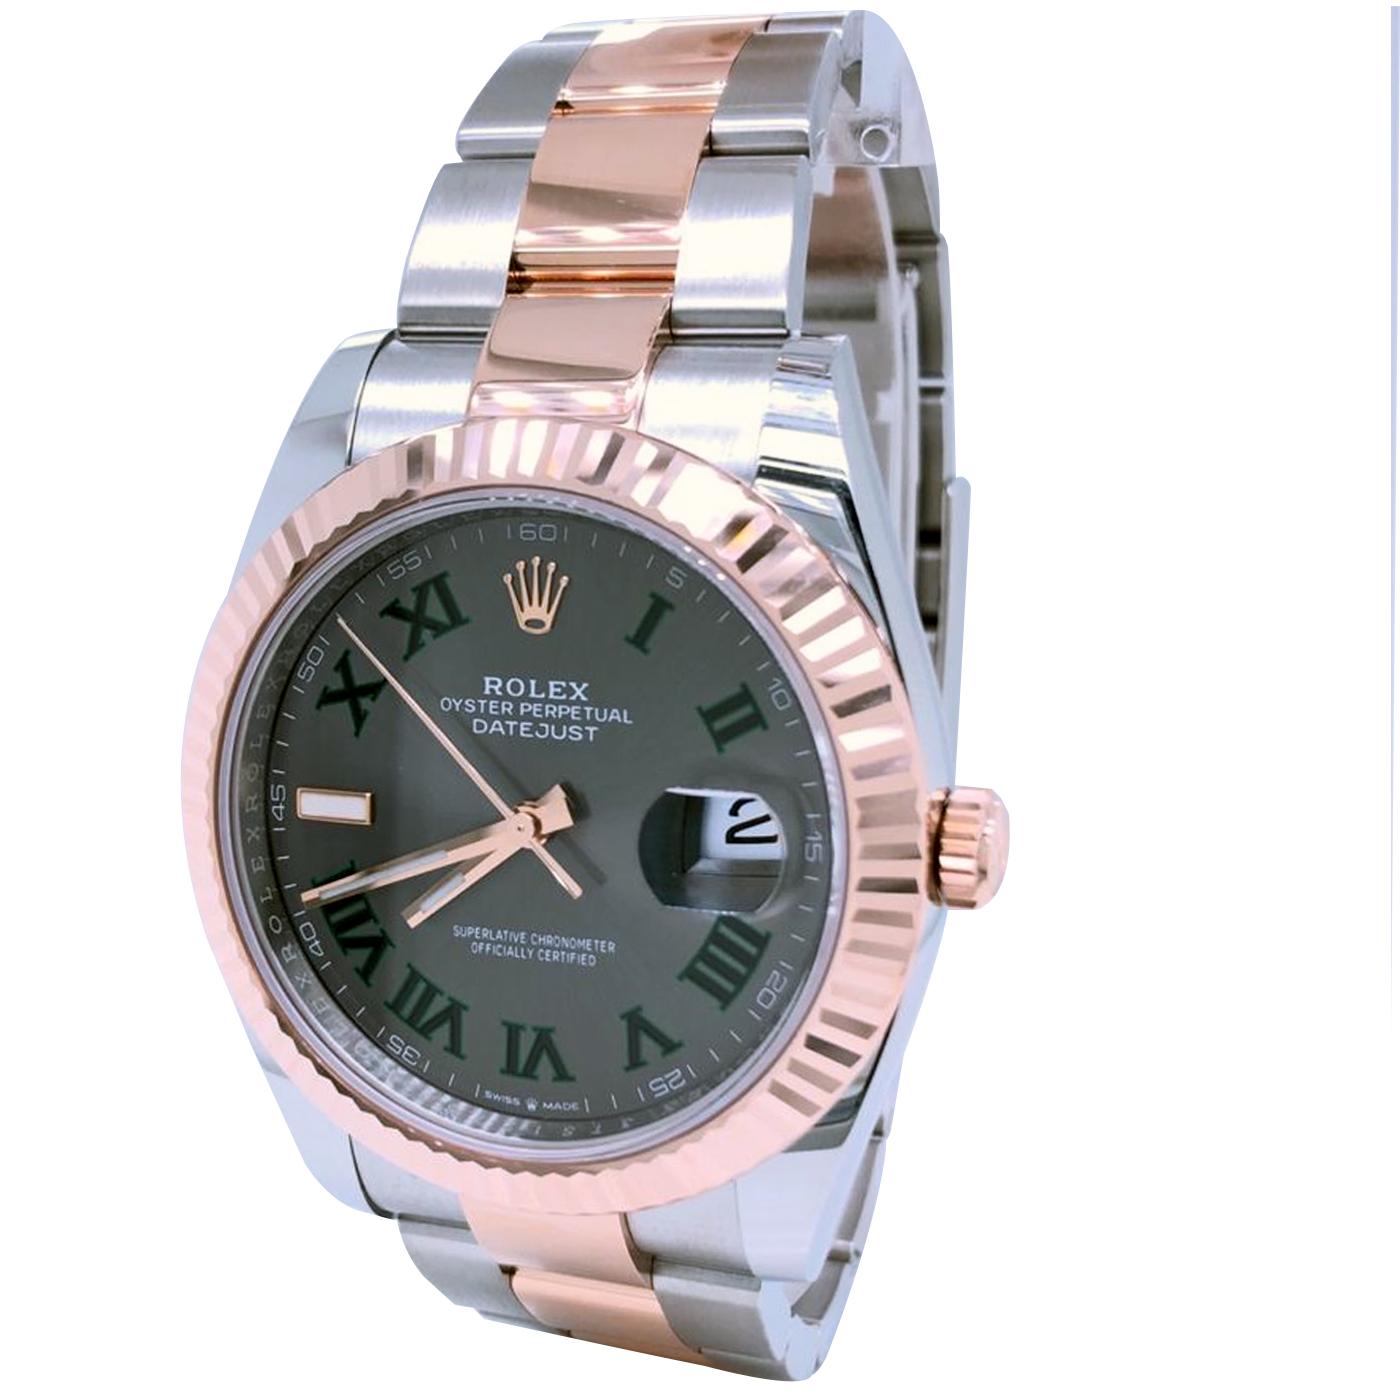 Rolex has come up with a design that can effortlessly find its way into your sophisticated timepiece collection. An 18k yellow gold and stainless steel bracelet and a durable grey colored dial with Roman hour markers and a date window warrant